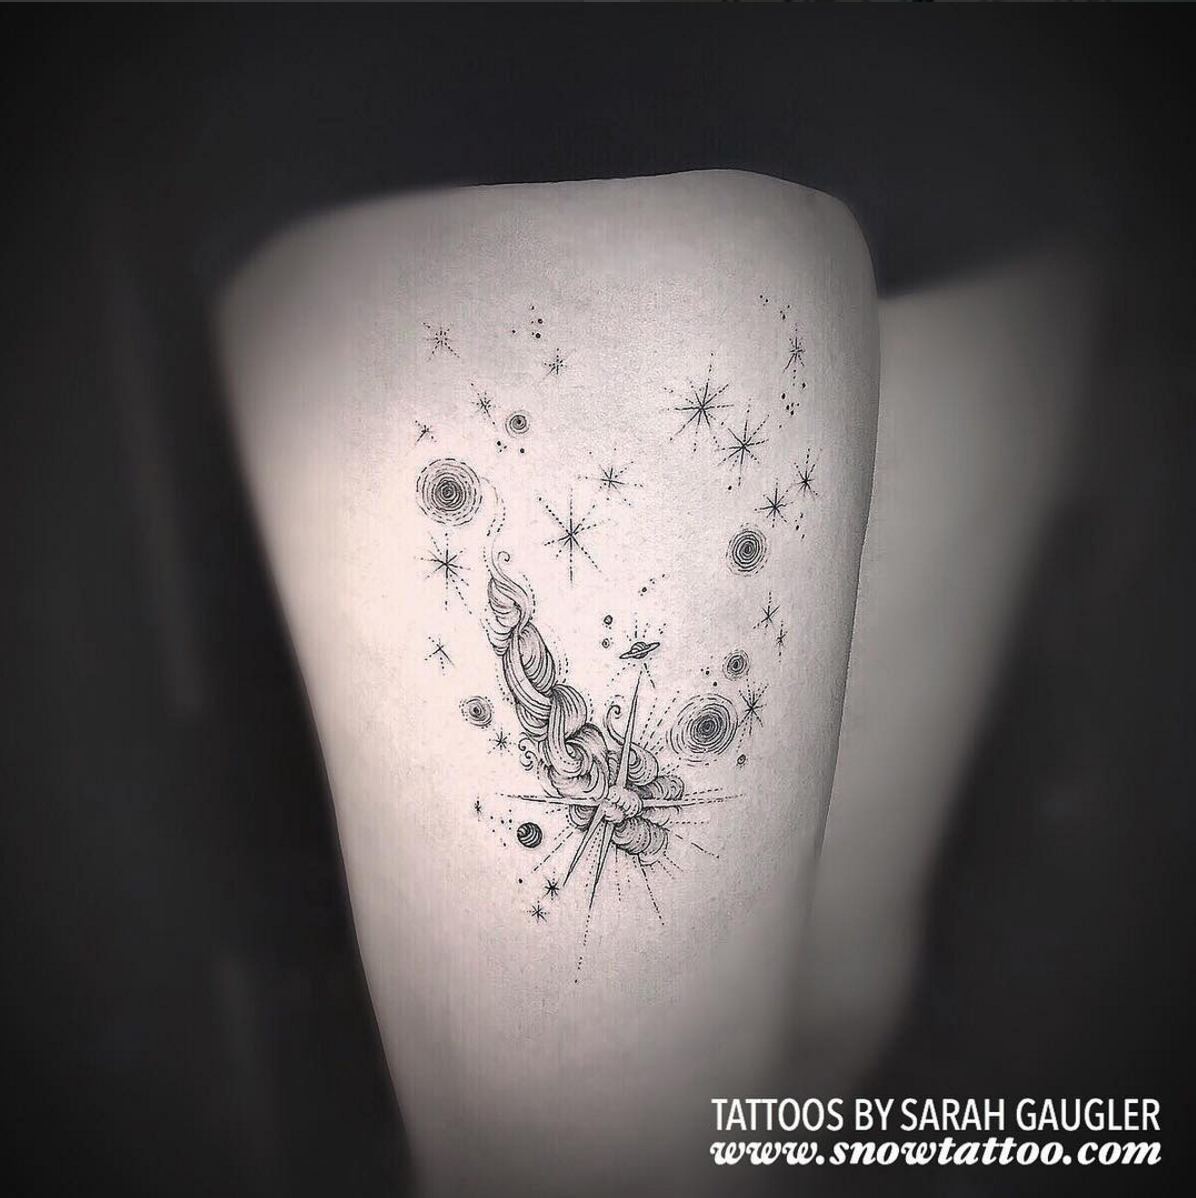 Tattoo tagged with small astronomy contemporary tiny galaxy  adrianbascur ifttt little star inner forearm  inkedappcom